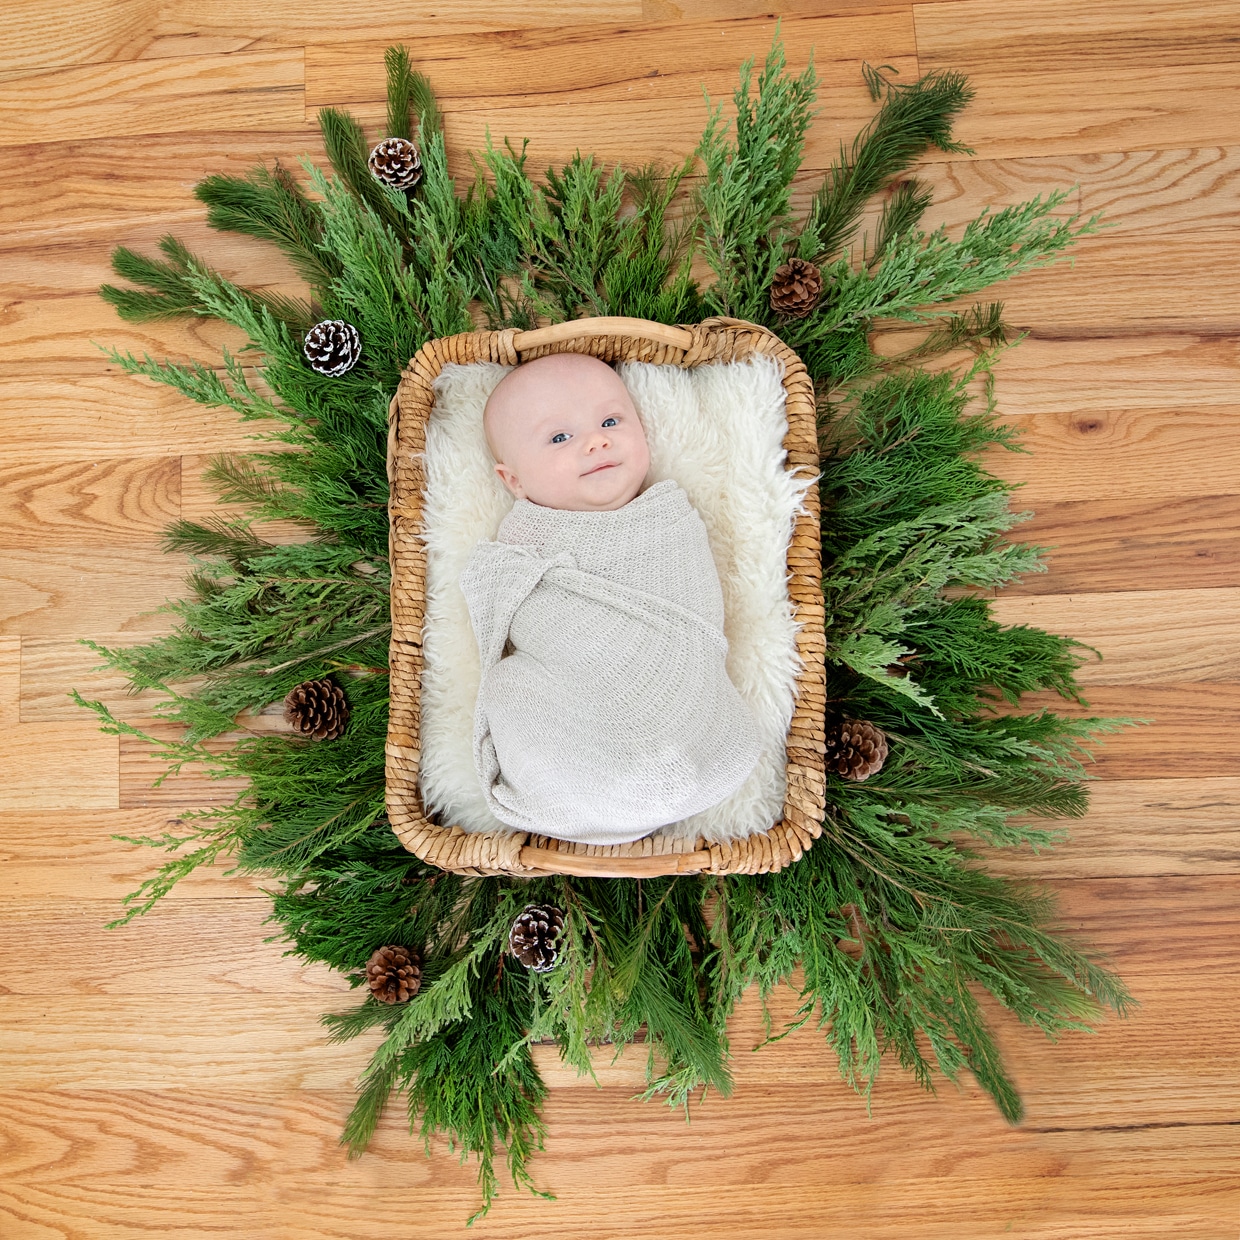 baby cuddled up in basket surrounded with holiday garland